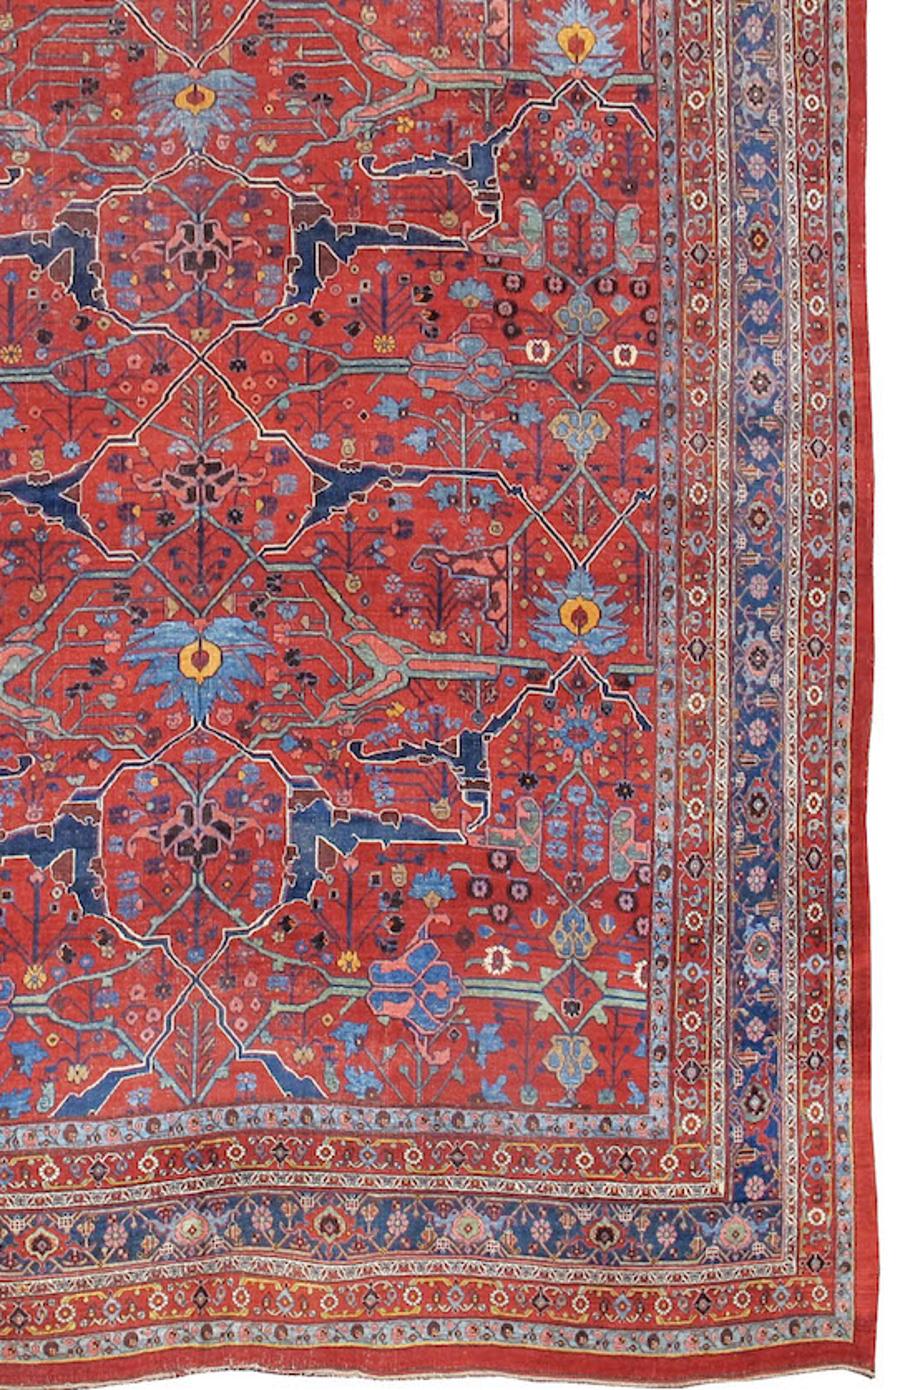 Large Oversized Antique Persian Bidjar Carpet, Late 19th Century

Finely drawn scrolls of vegetal ornamentation are traced against the saturated ruby-red ground of this fine Bidjar carpet. The delicacy of drawing is accented in no fewer than three